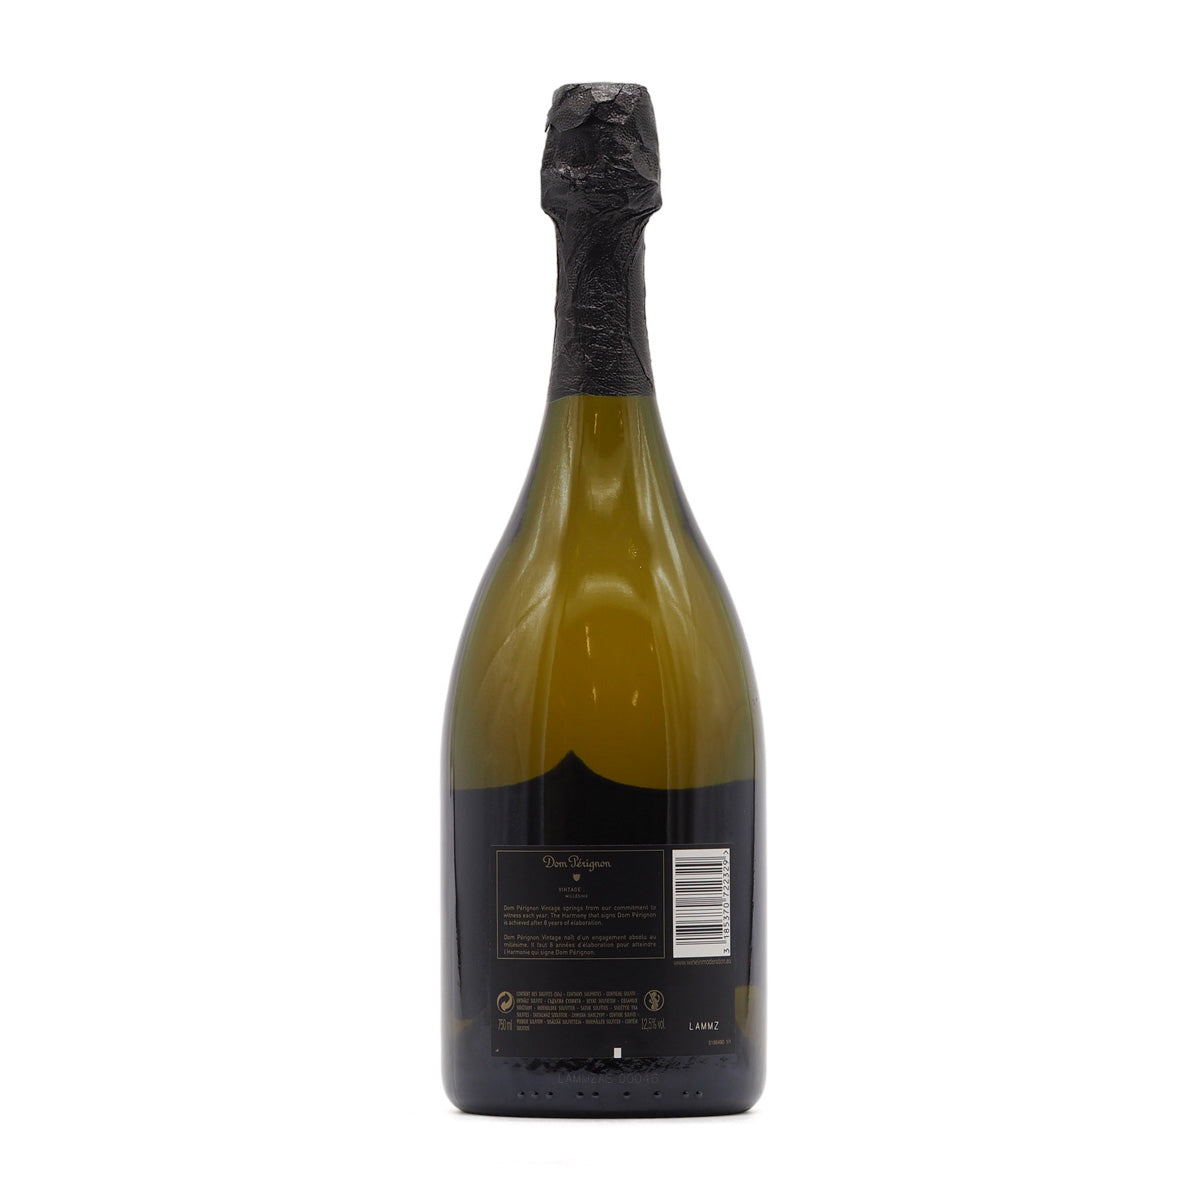 Dom Perignon Vintage 2013, 750ml French champagne, from Epernay, Champagne, France – GDV Fine Wines, Hong Kong